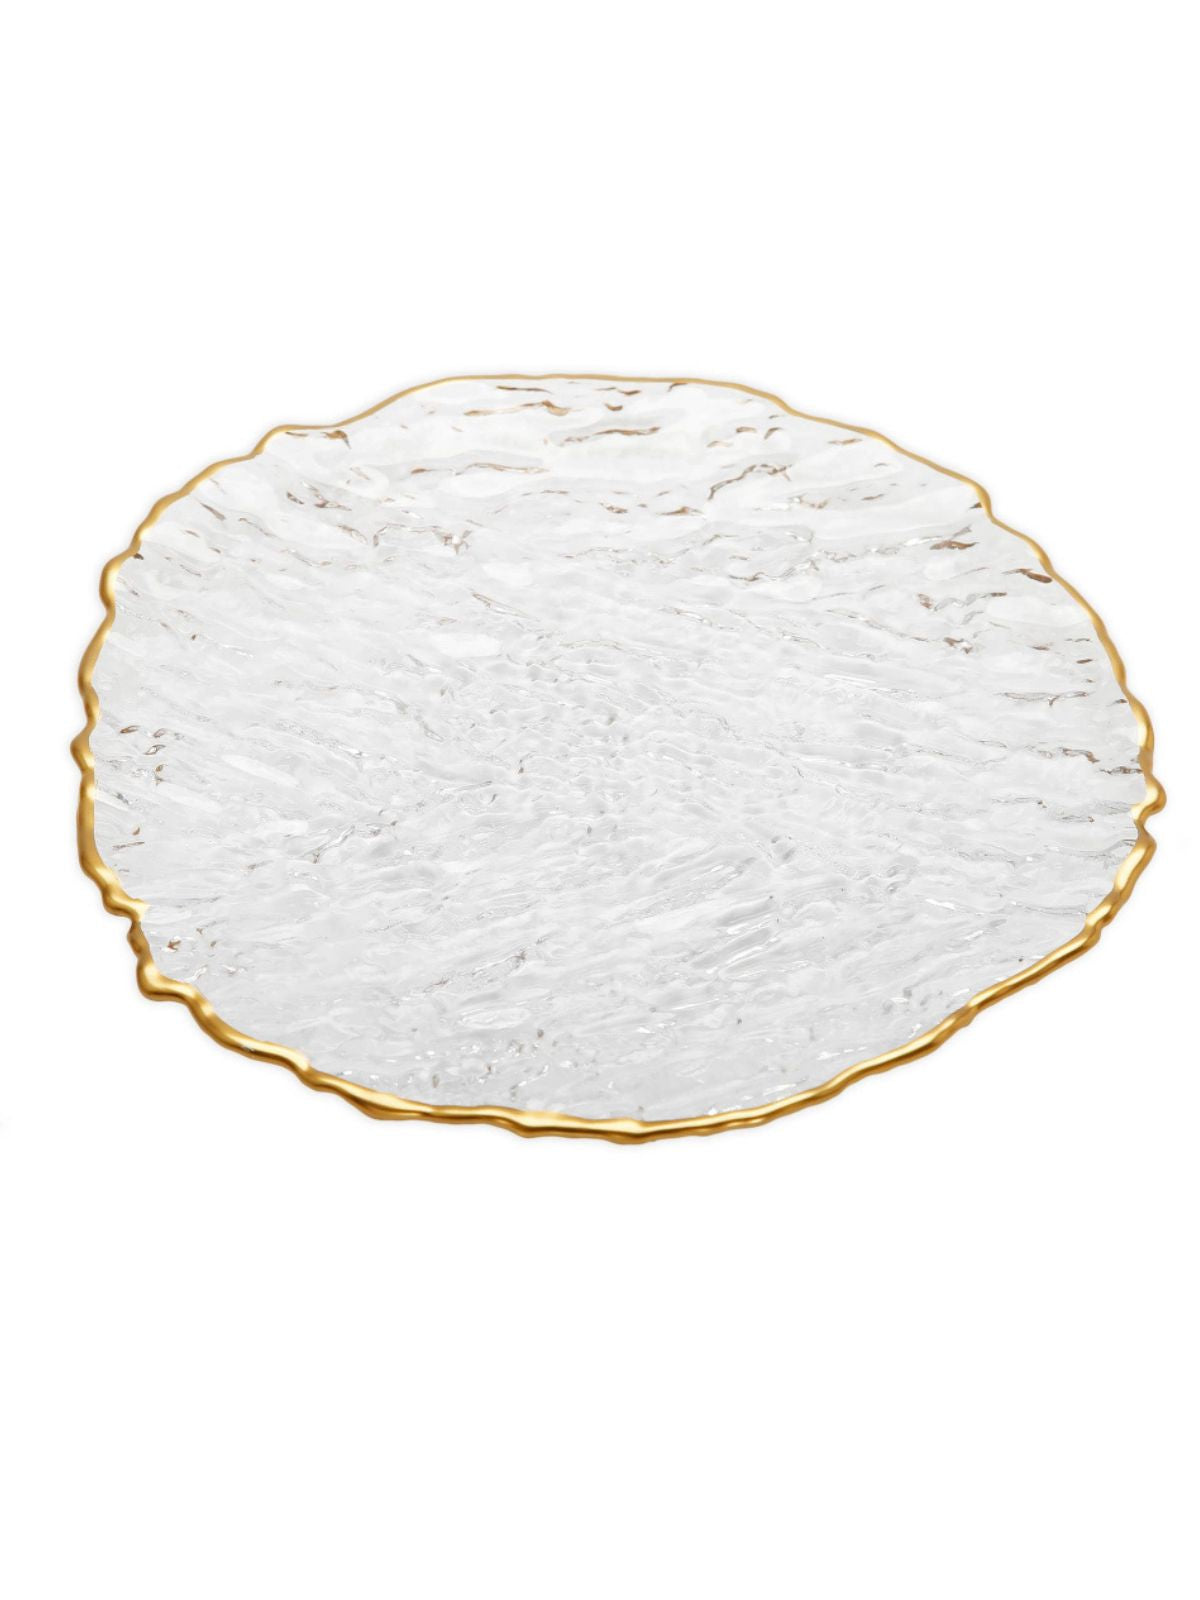 Serving your guest on this plates will defiantly make a statement. This set of 12 plates were constructed out of crushed glass material and designed with a gold trim. 